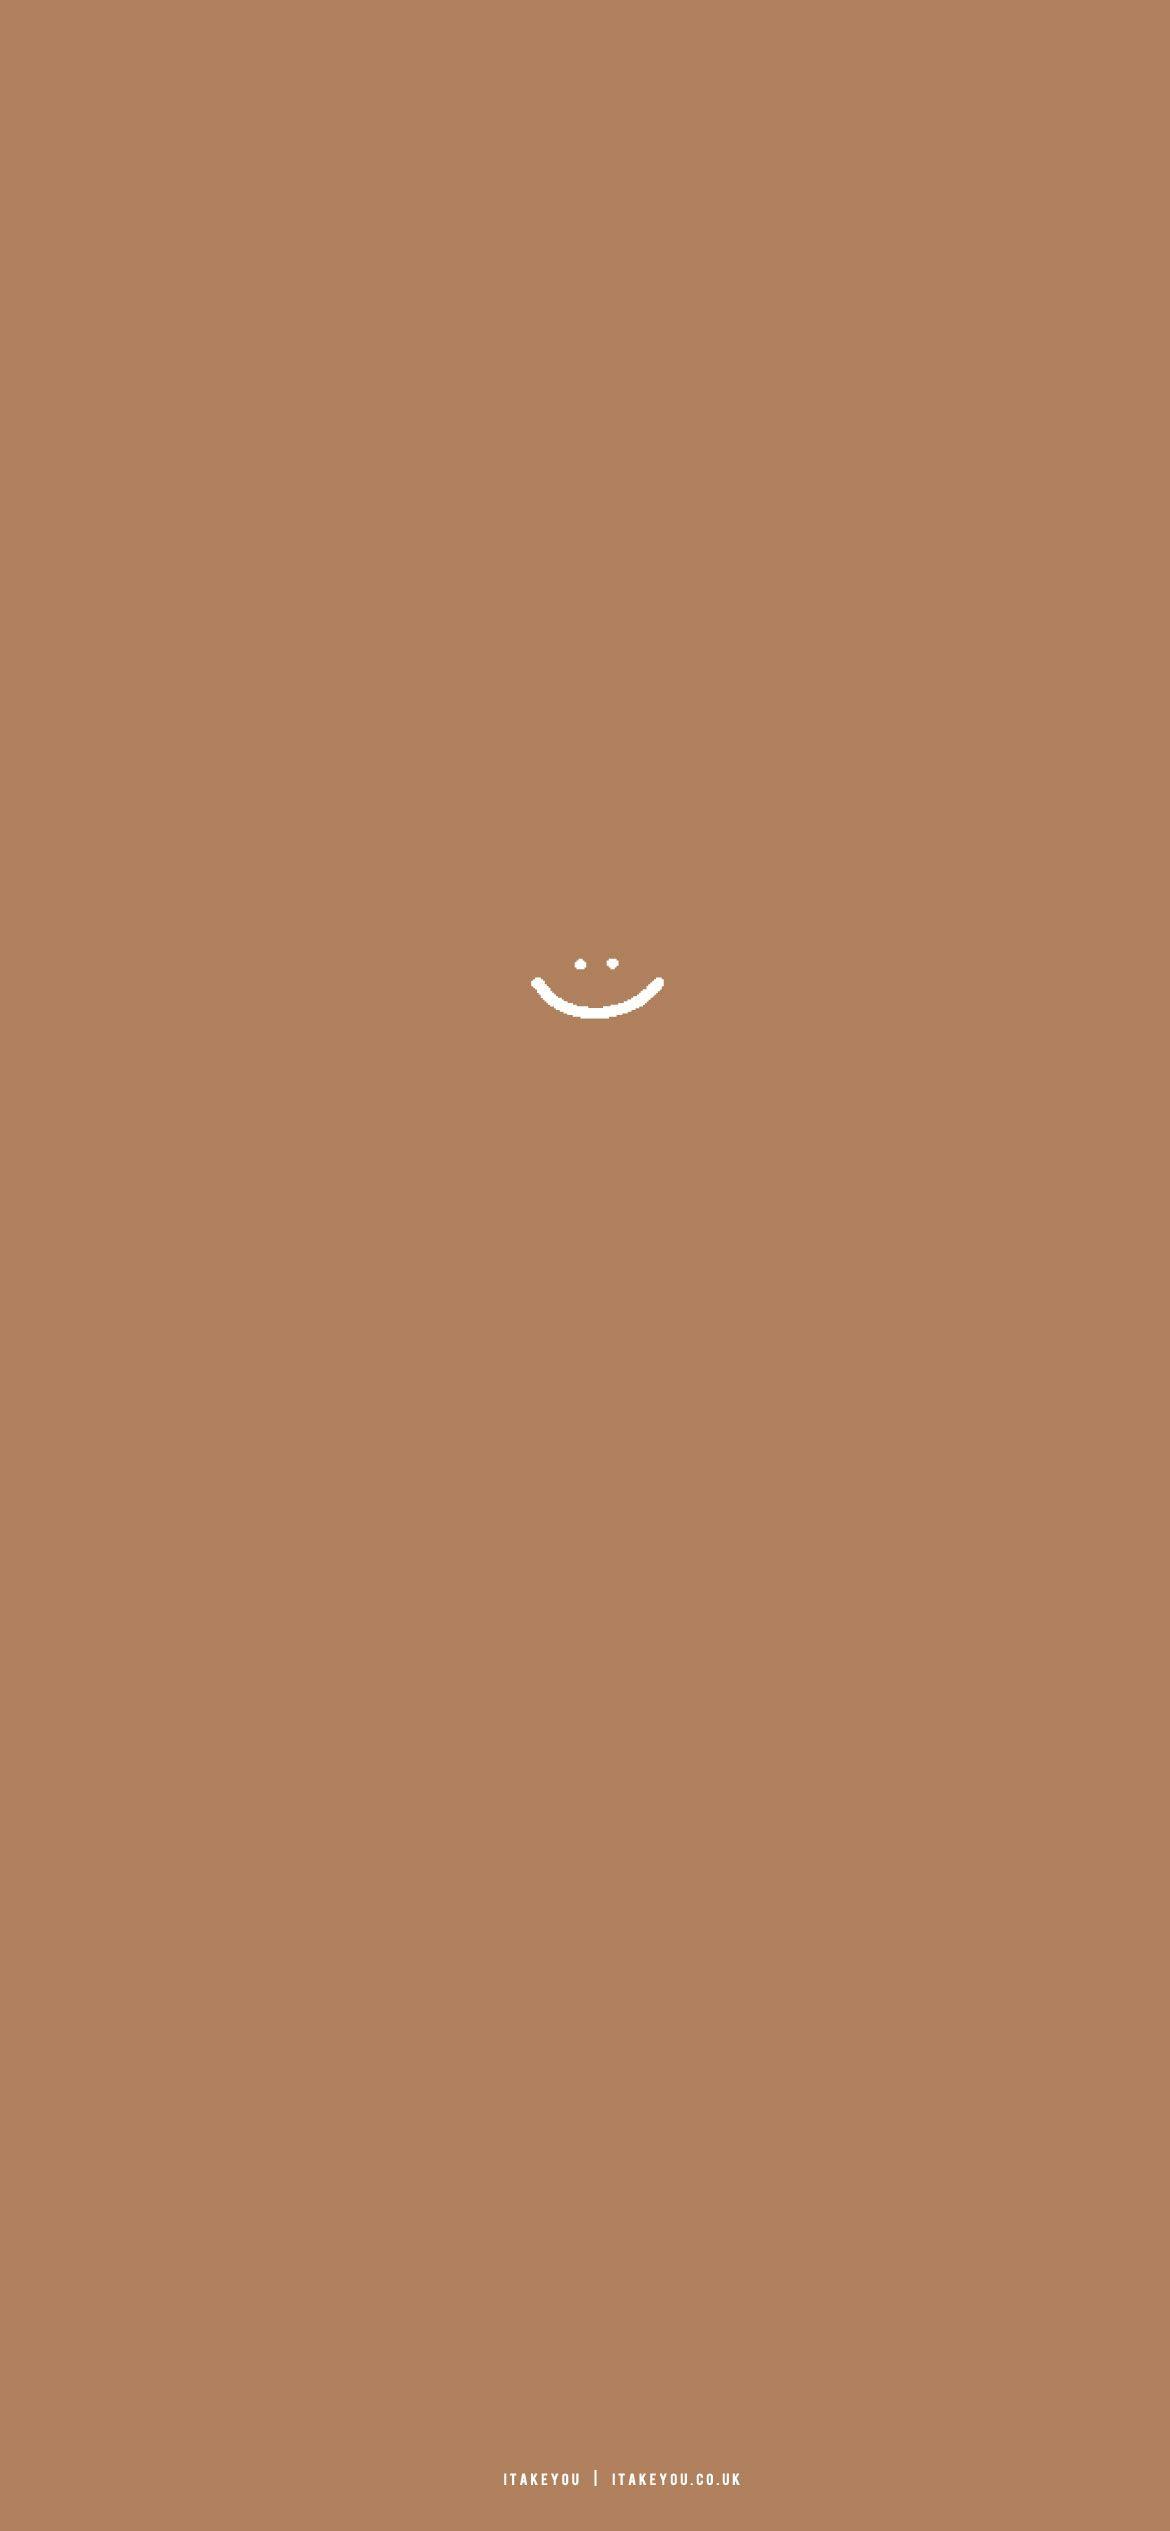 Minimalist Brown Wallpaper iPhone Ideas For Smile